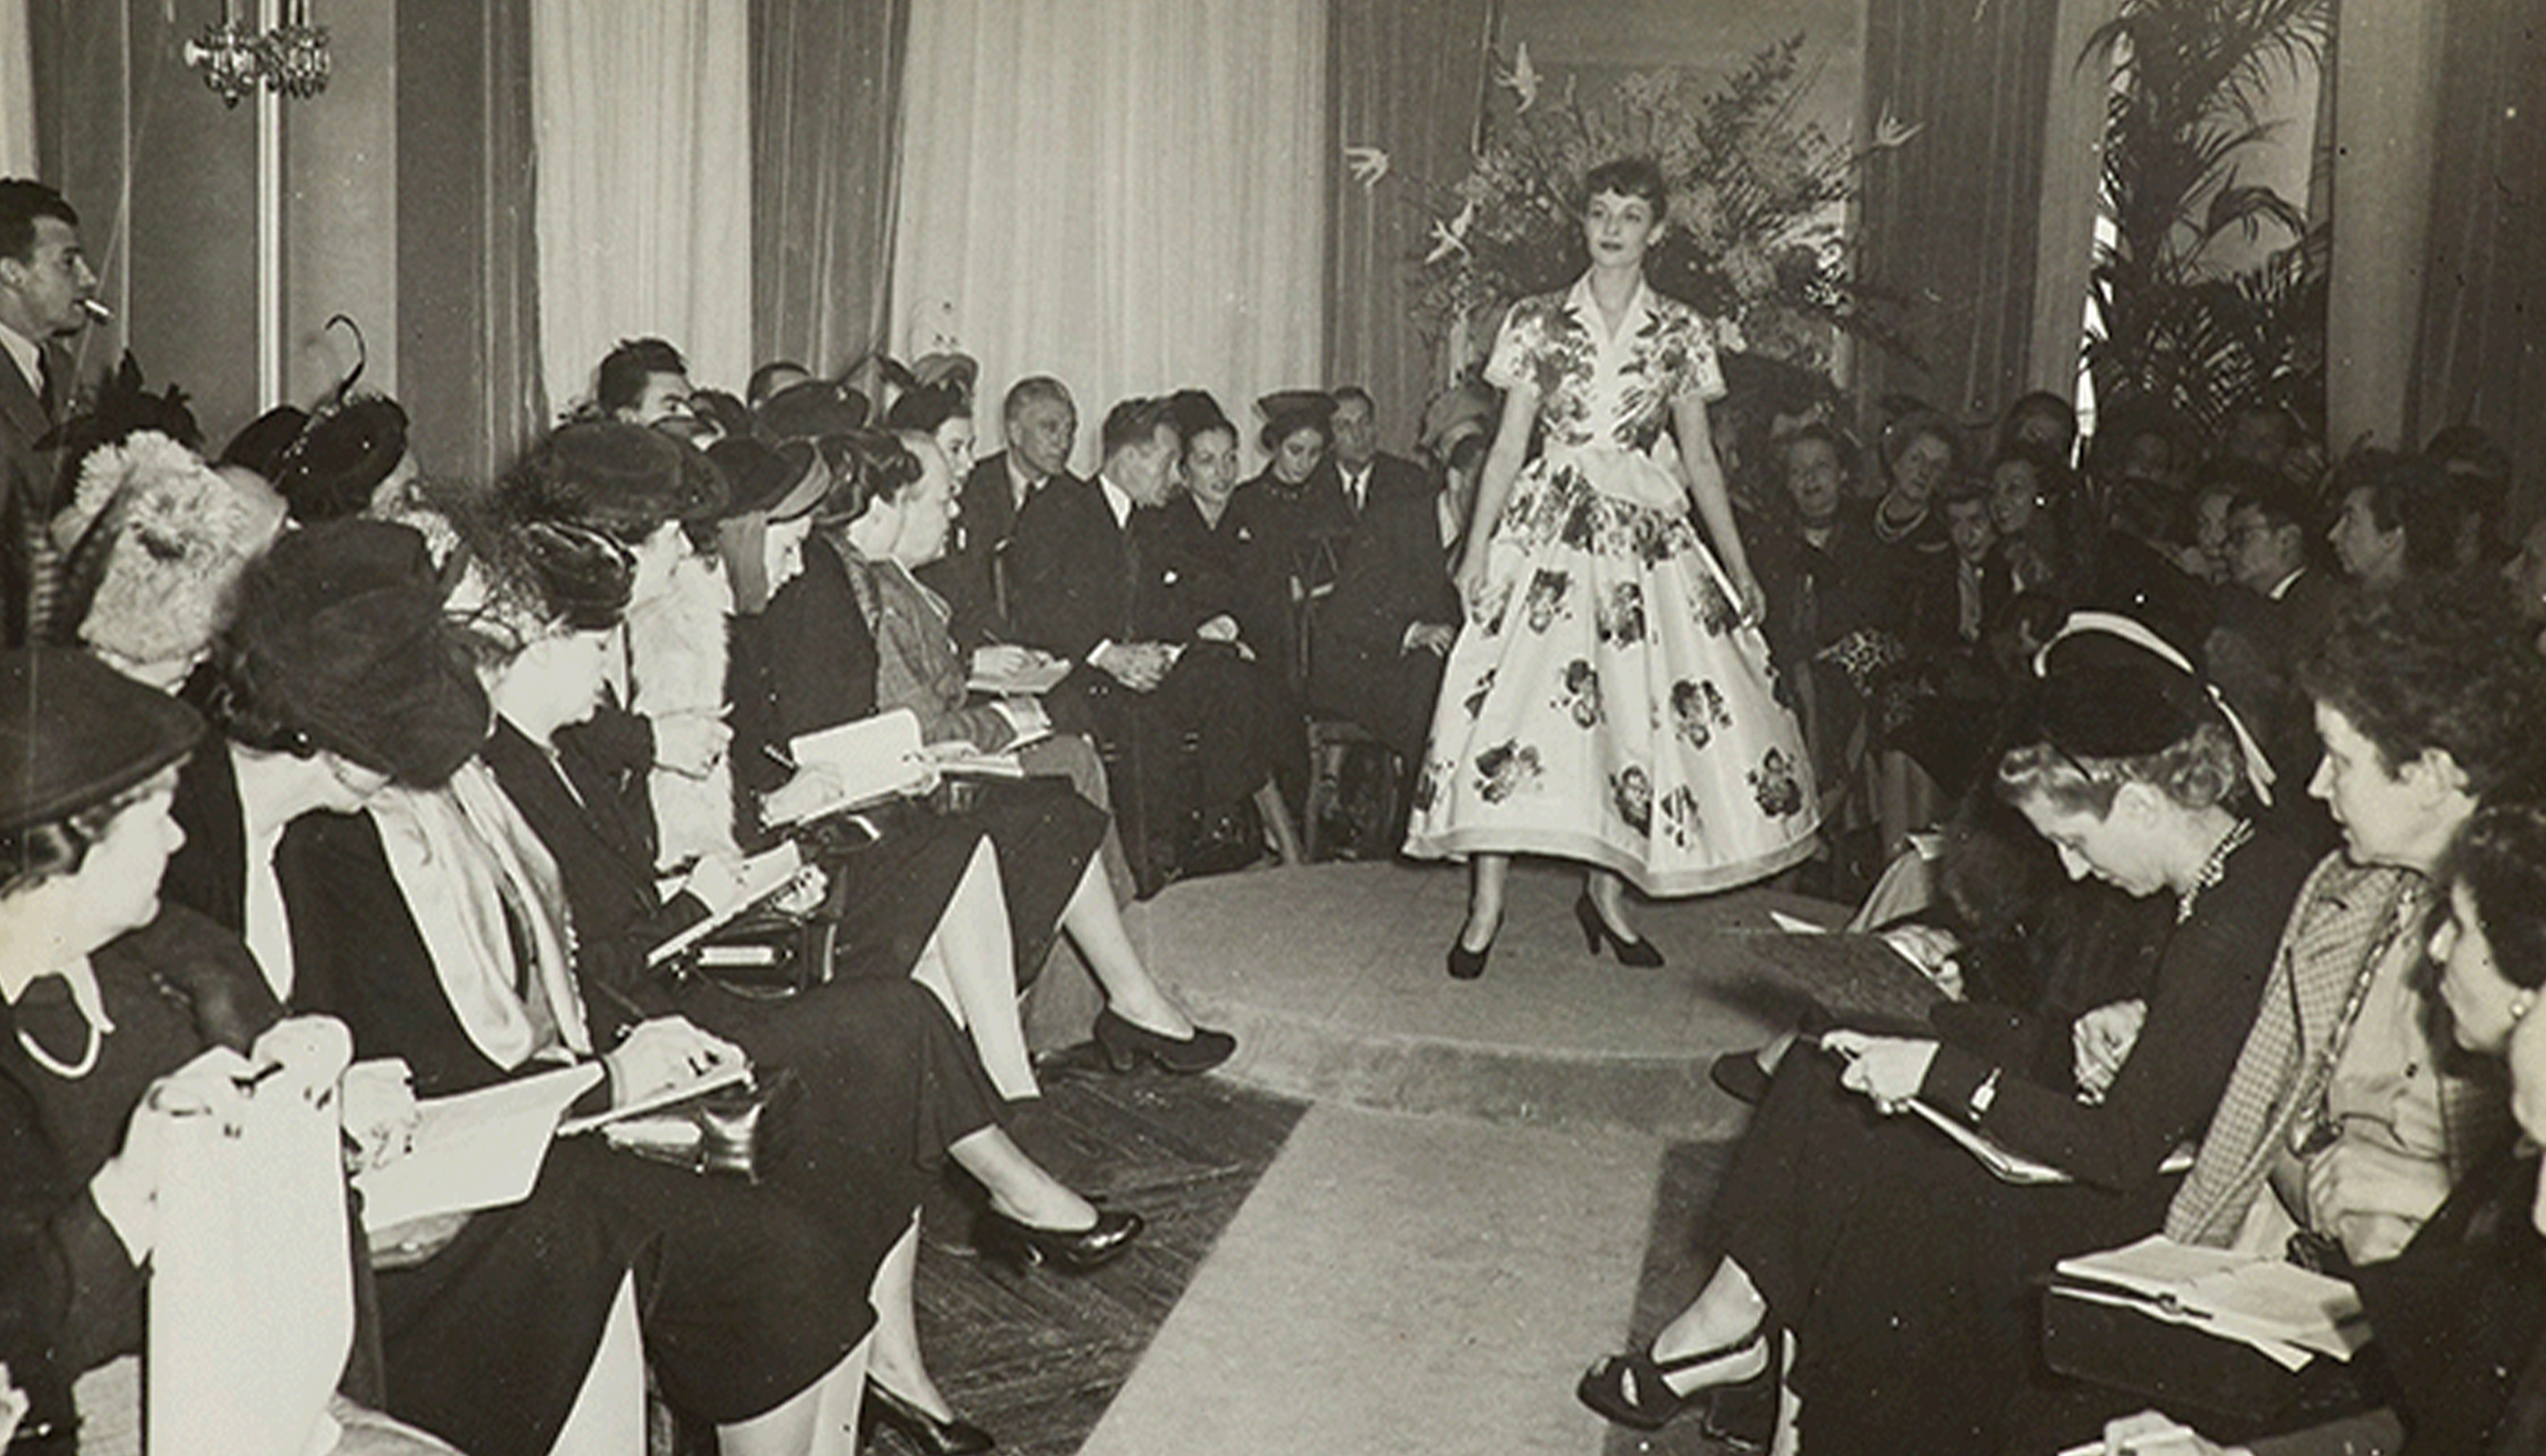 Oct. 09, 1965 - The fashion-show of Pierre Balmain.: Will be the